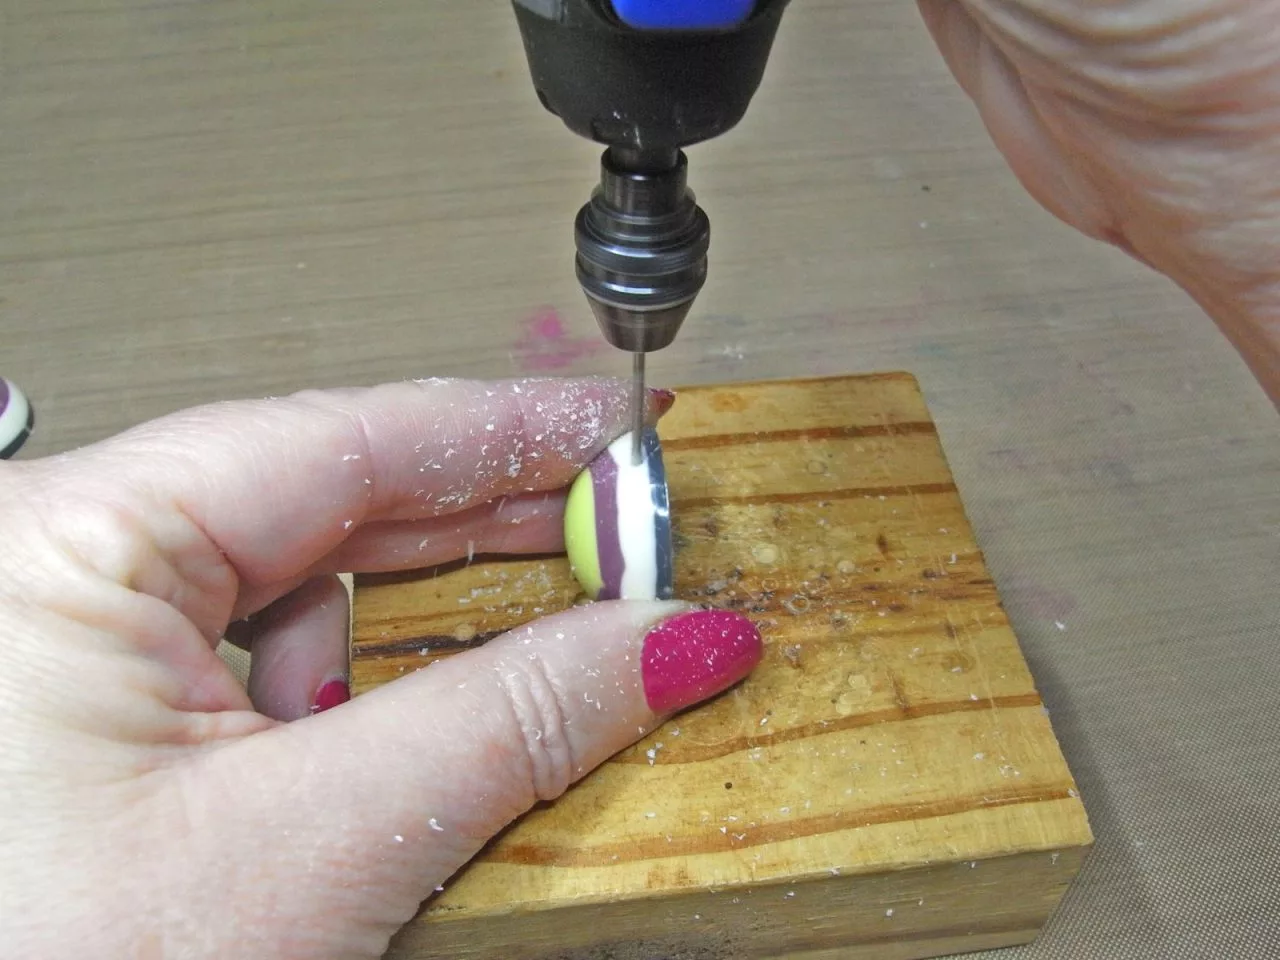  drilling a hole in a resin charm on a wood block